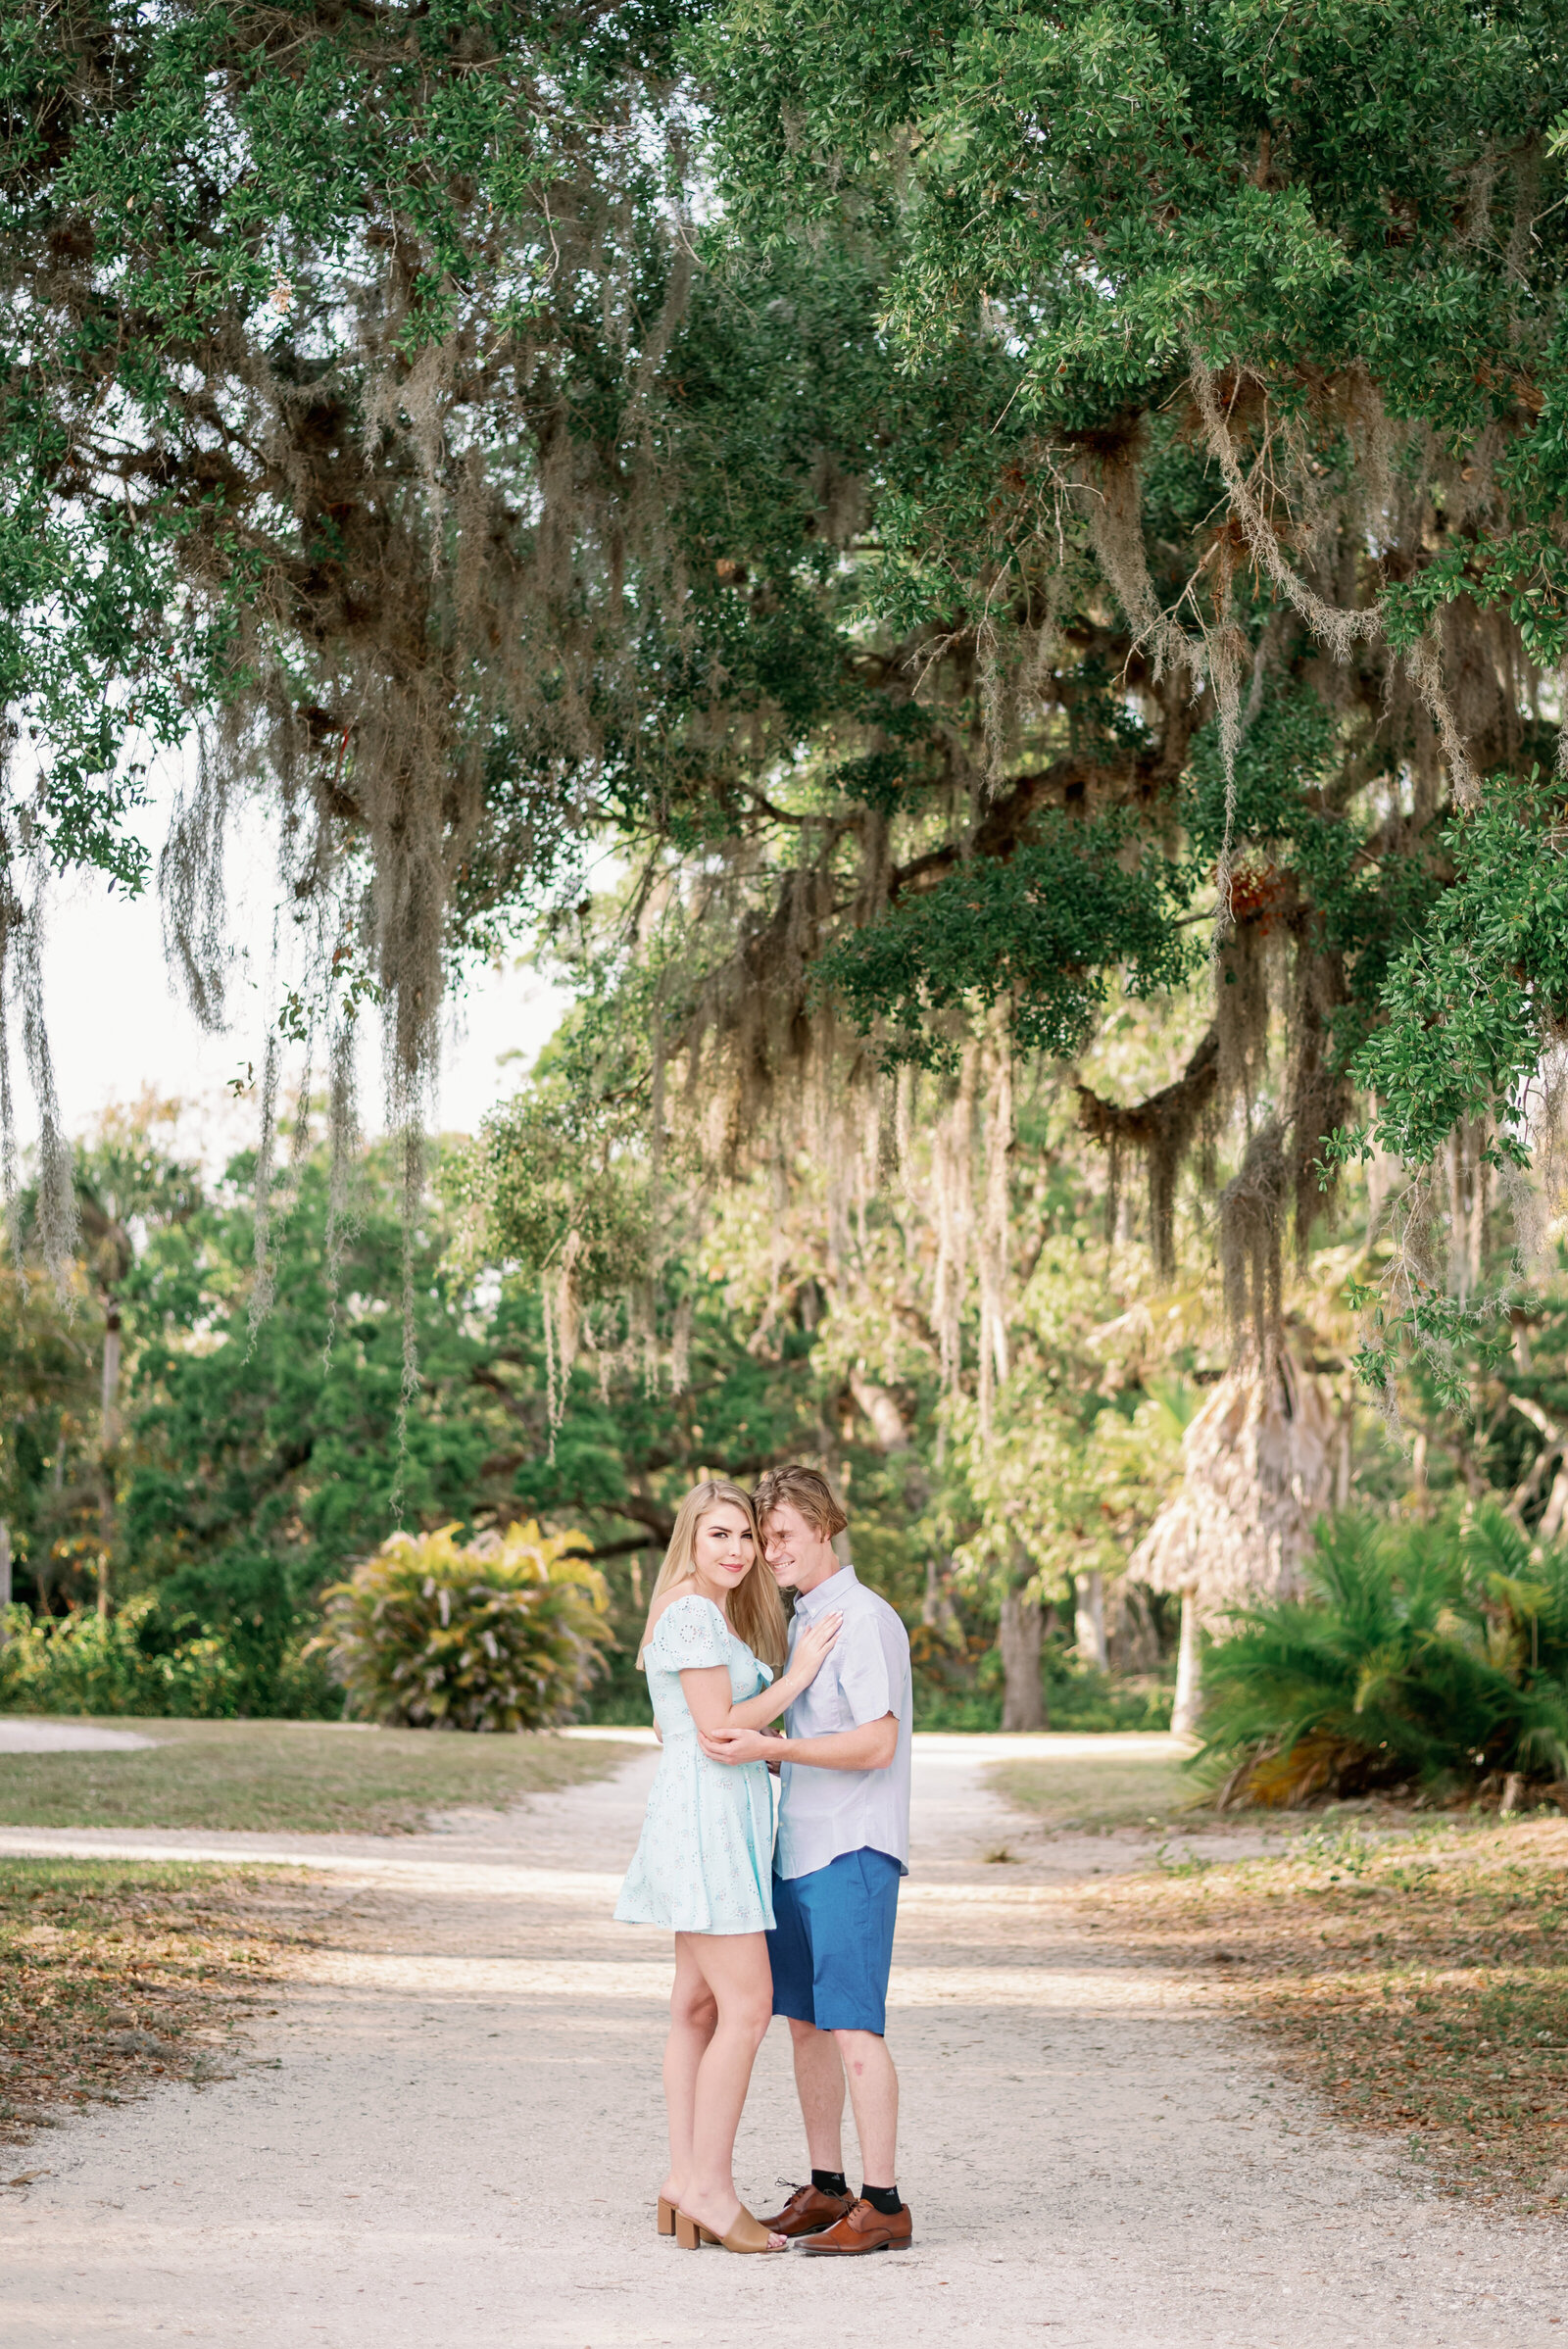 engaged couple standing front to front, arms and hands on each other. Woman is looking at the camera smiling while her finacé looks slightly at her. They are on a sandy pathway with a large mossy oak tree above them